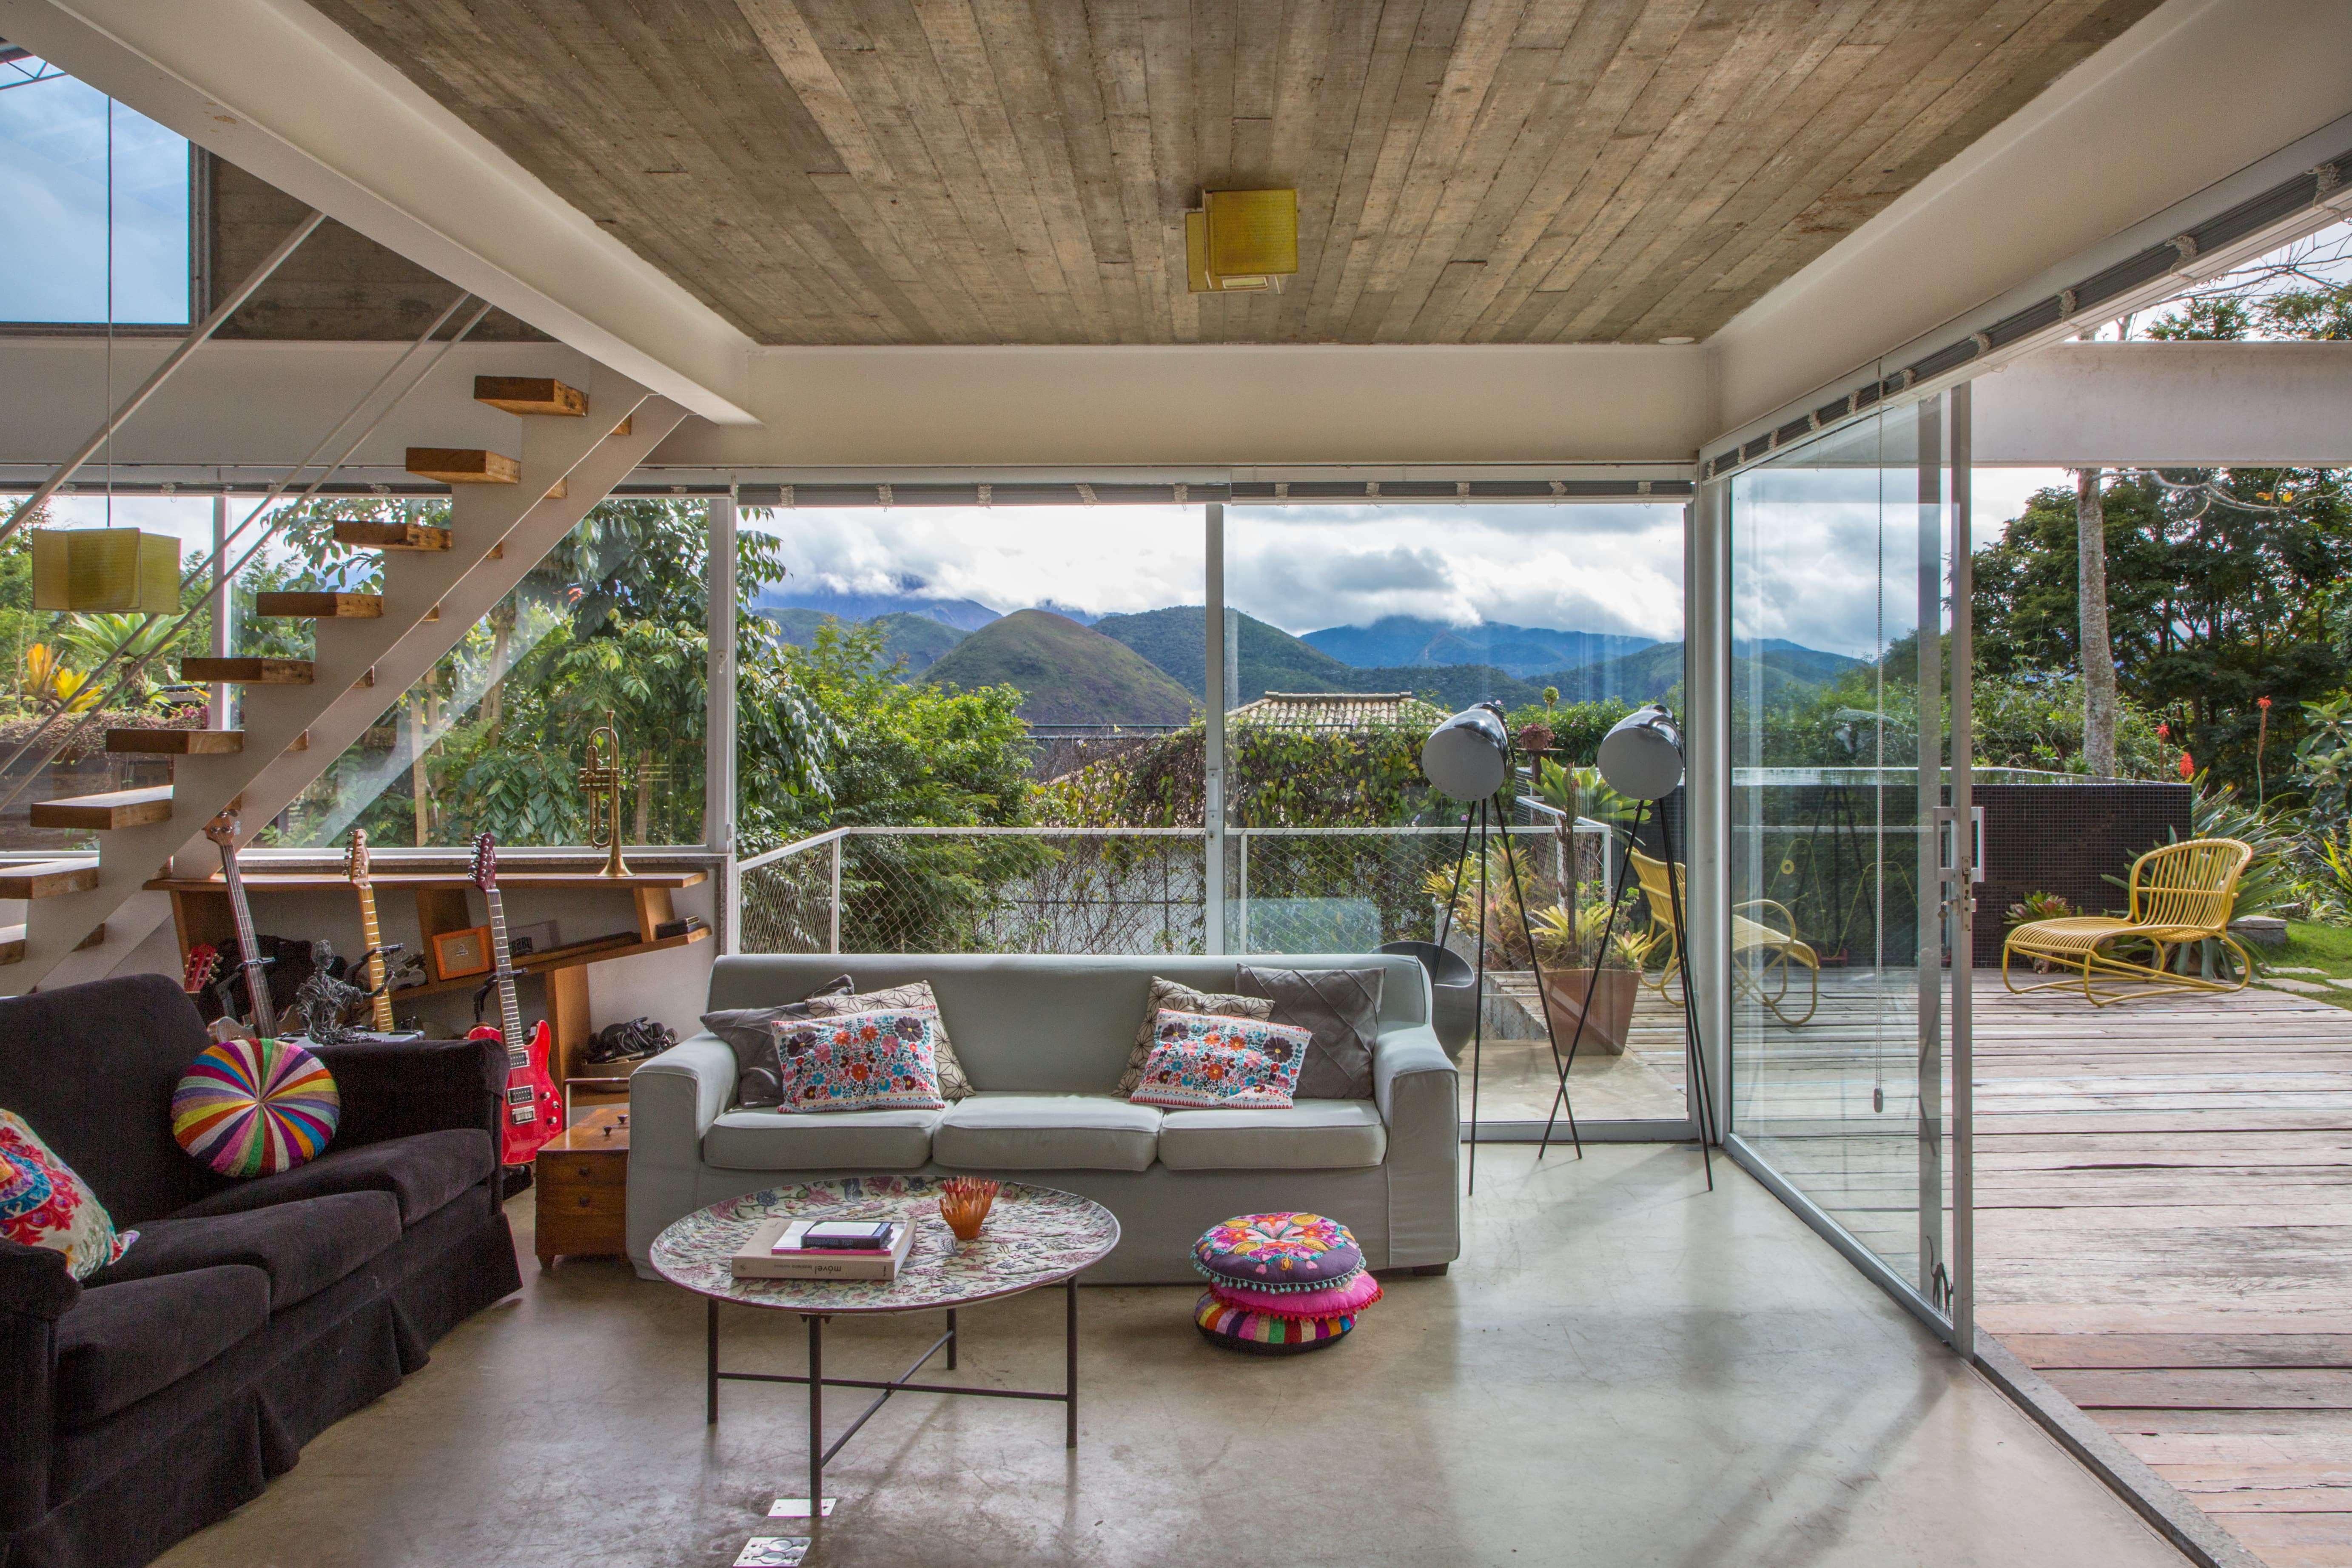 From the living room in the house, you can see the surroundings through wide glass openings